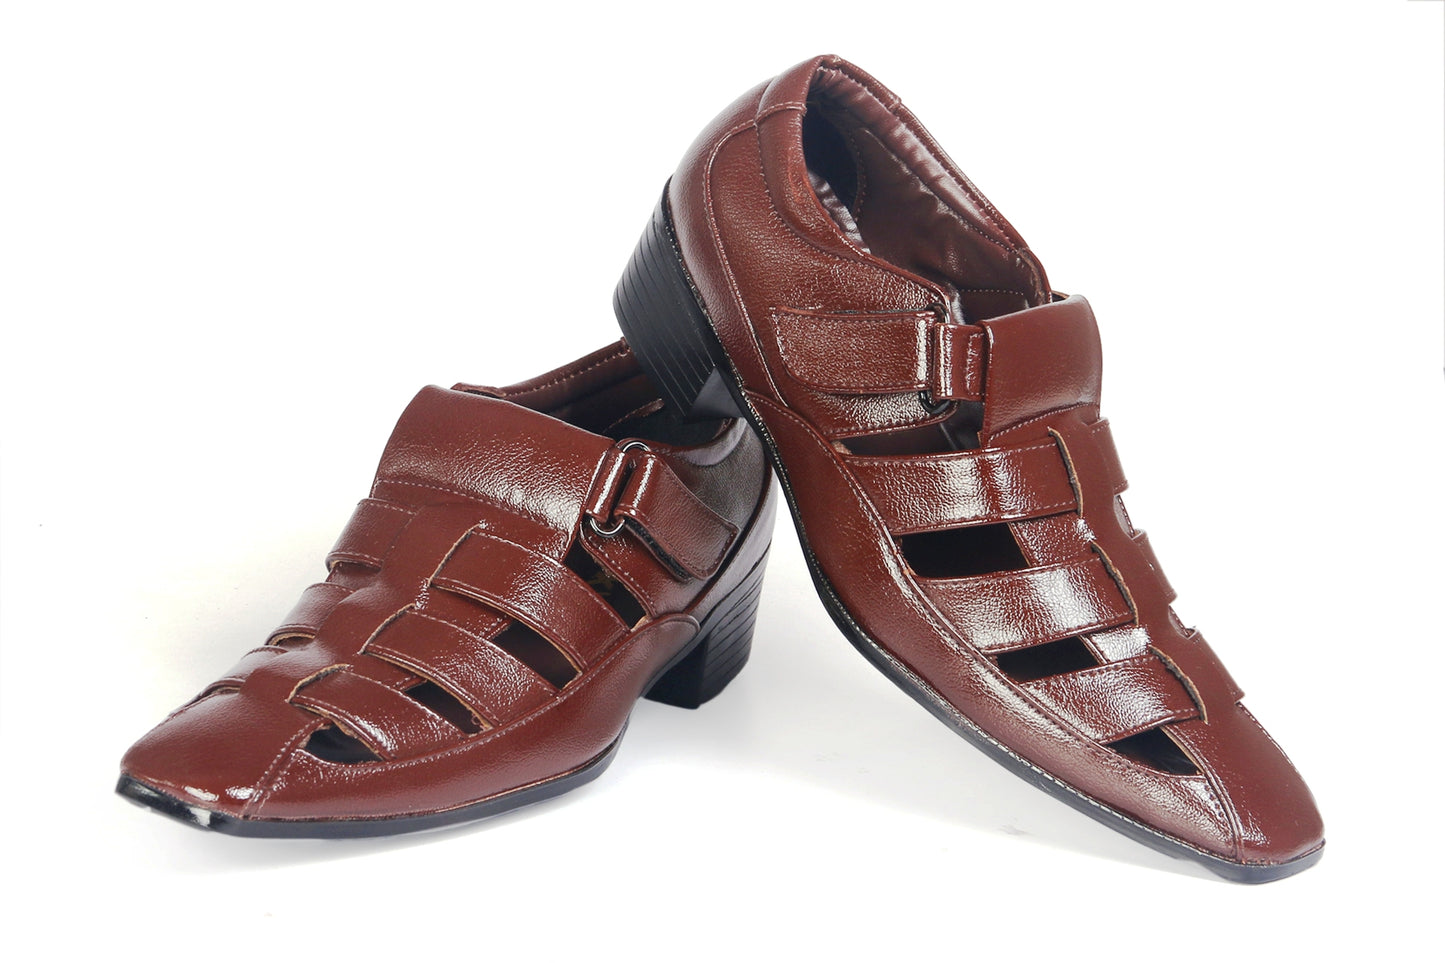 Bxxy Height Increasing Casual Roman Sandals For Men